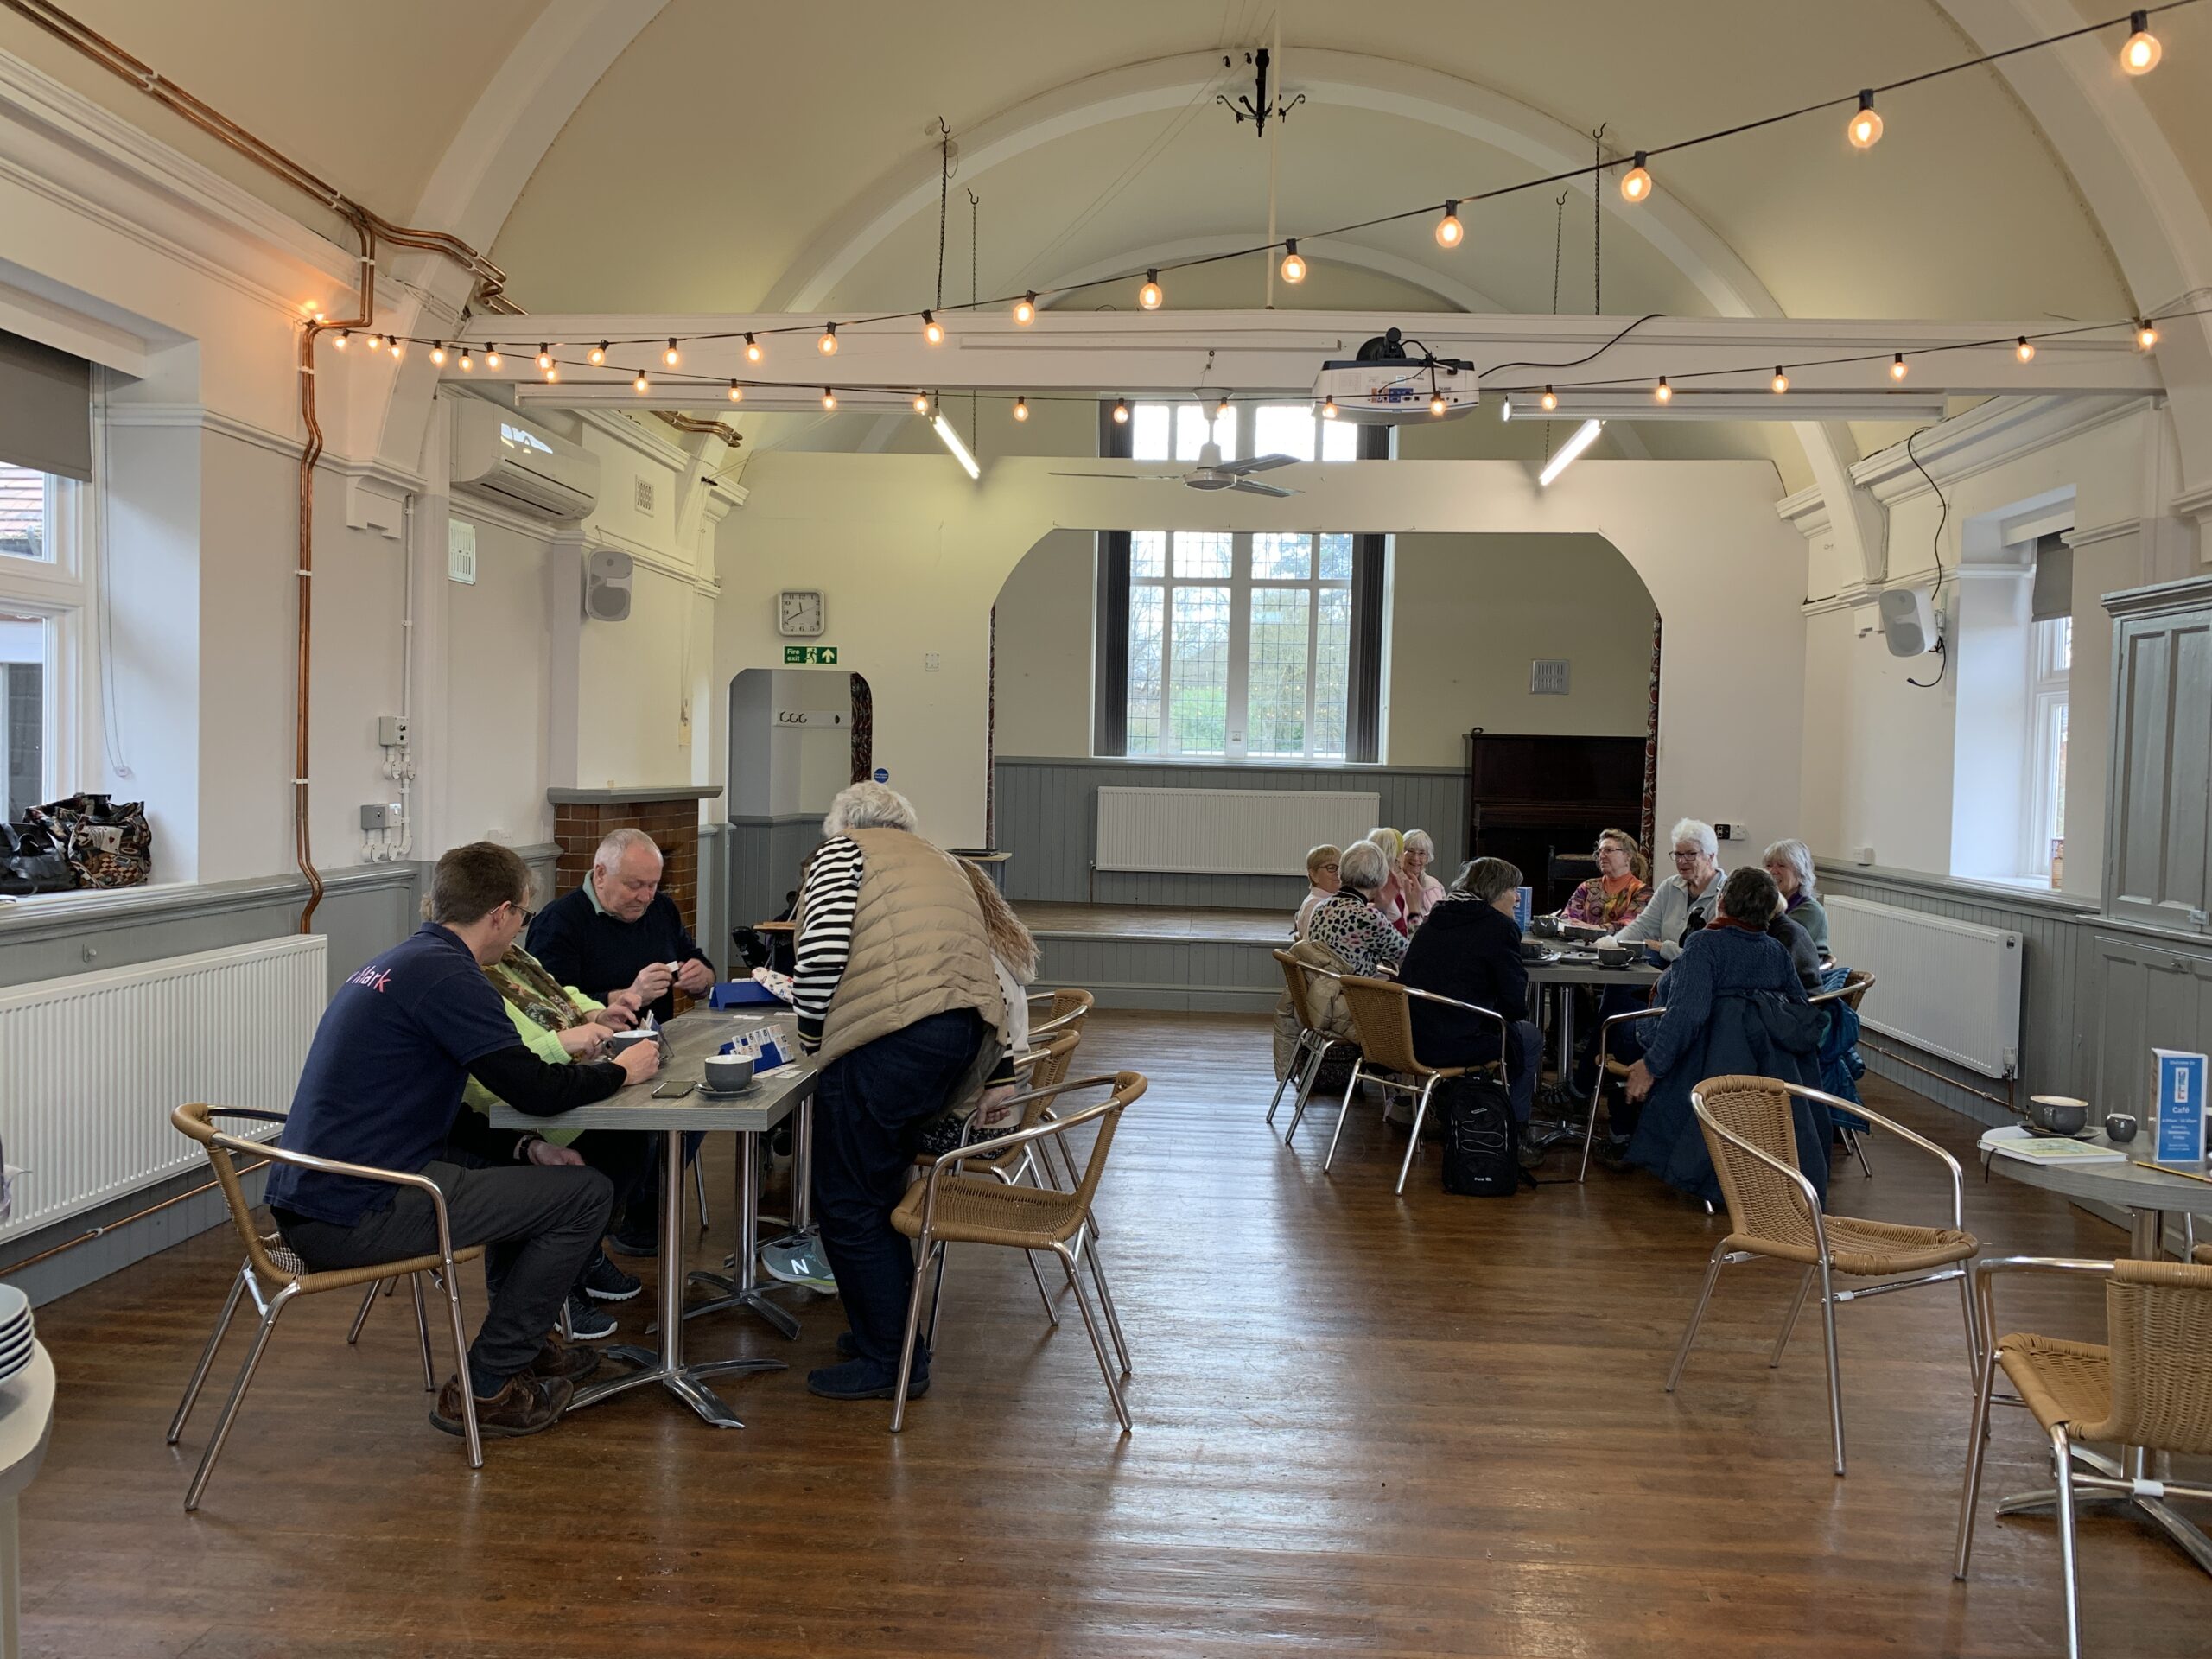 Inside the cafe at The Well in Ingoldisthorpe church hall.